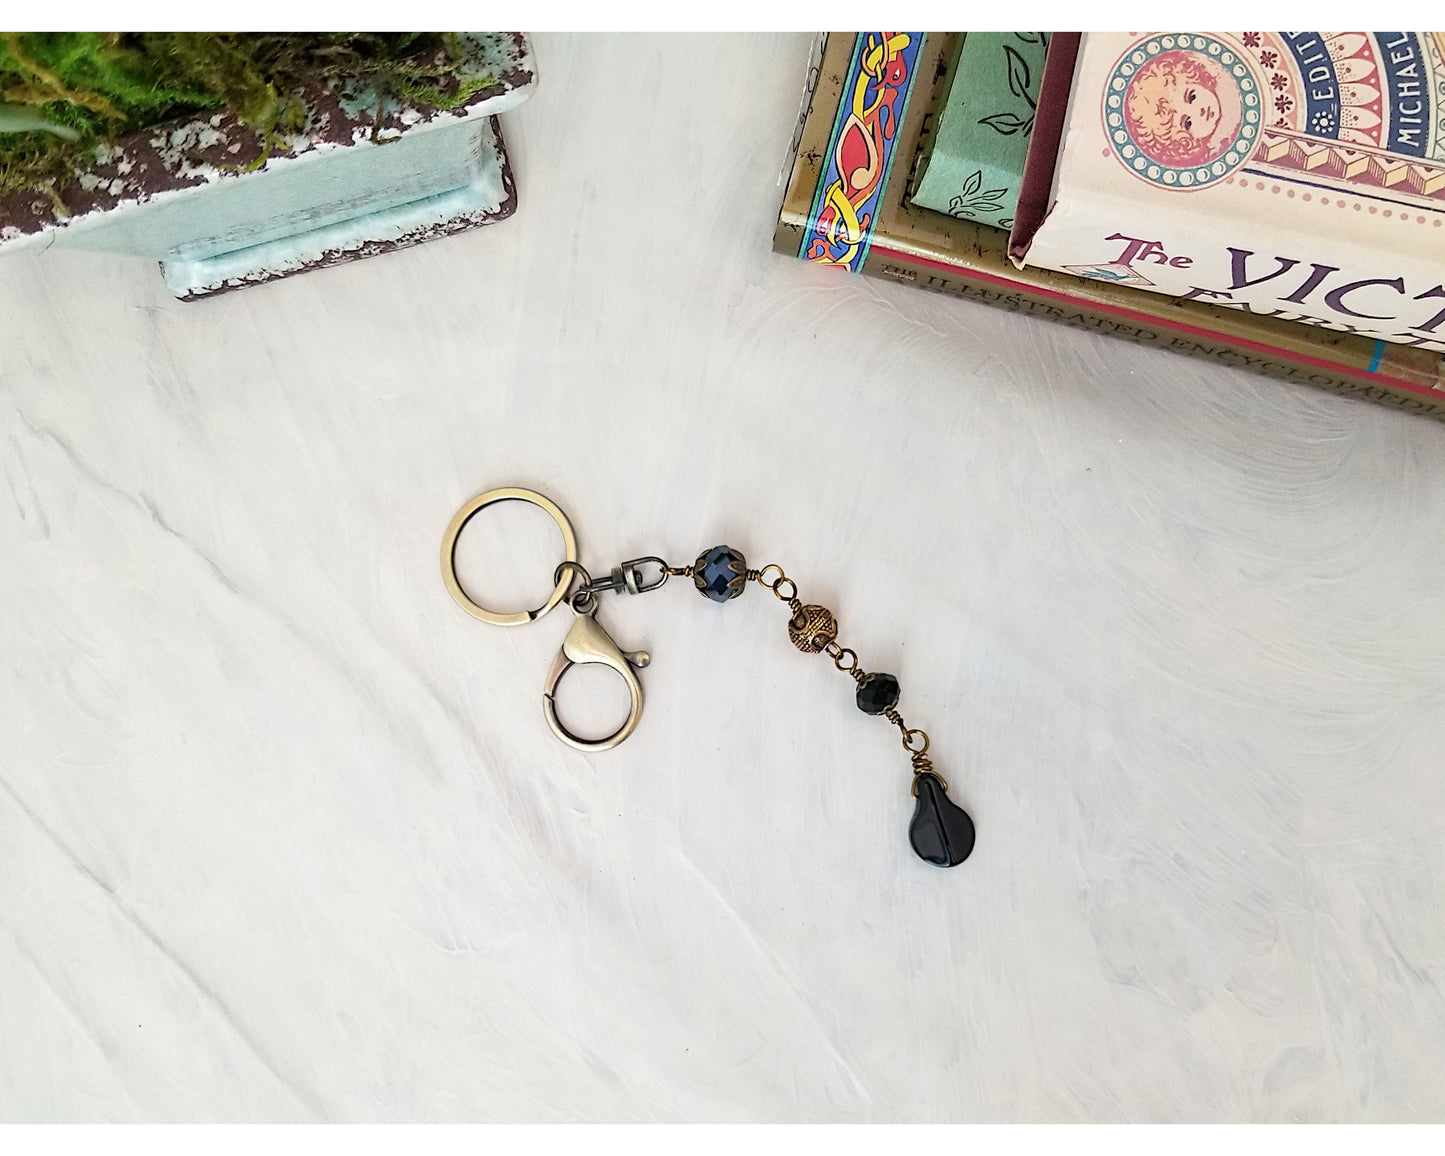 Key Ring with Wire Wrapped Fob in Black, Garden, Party, Renaissance, Medieval, Fairytale, Choice of Colors and Metals